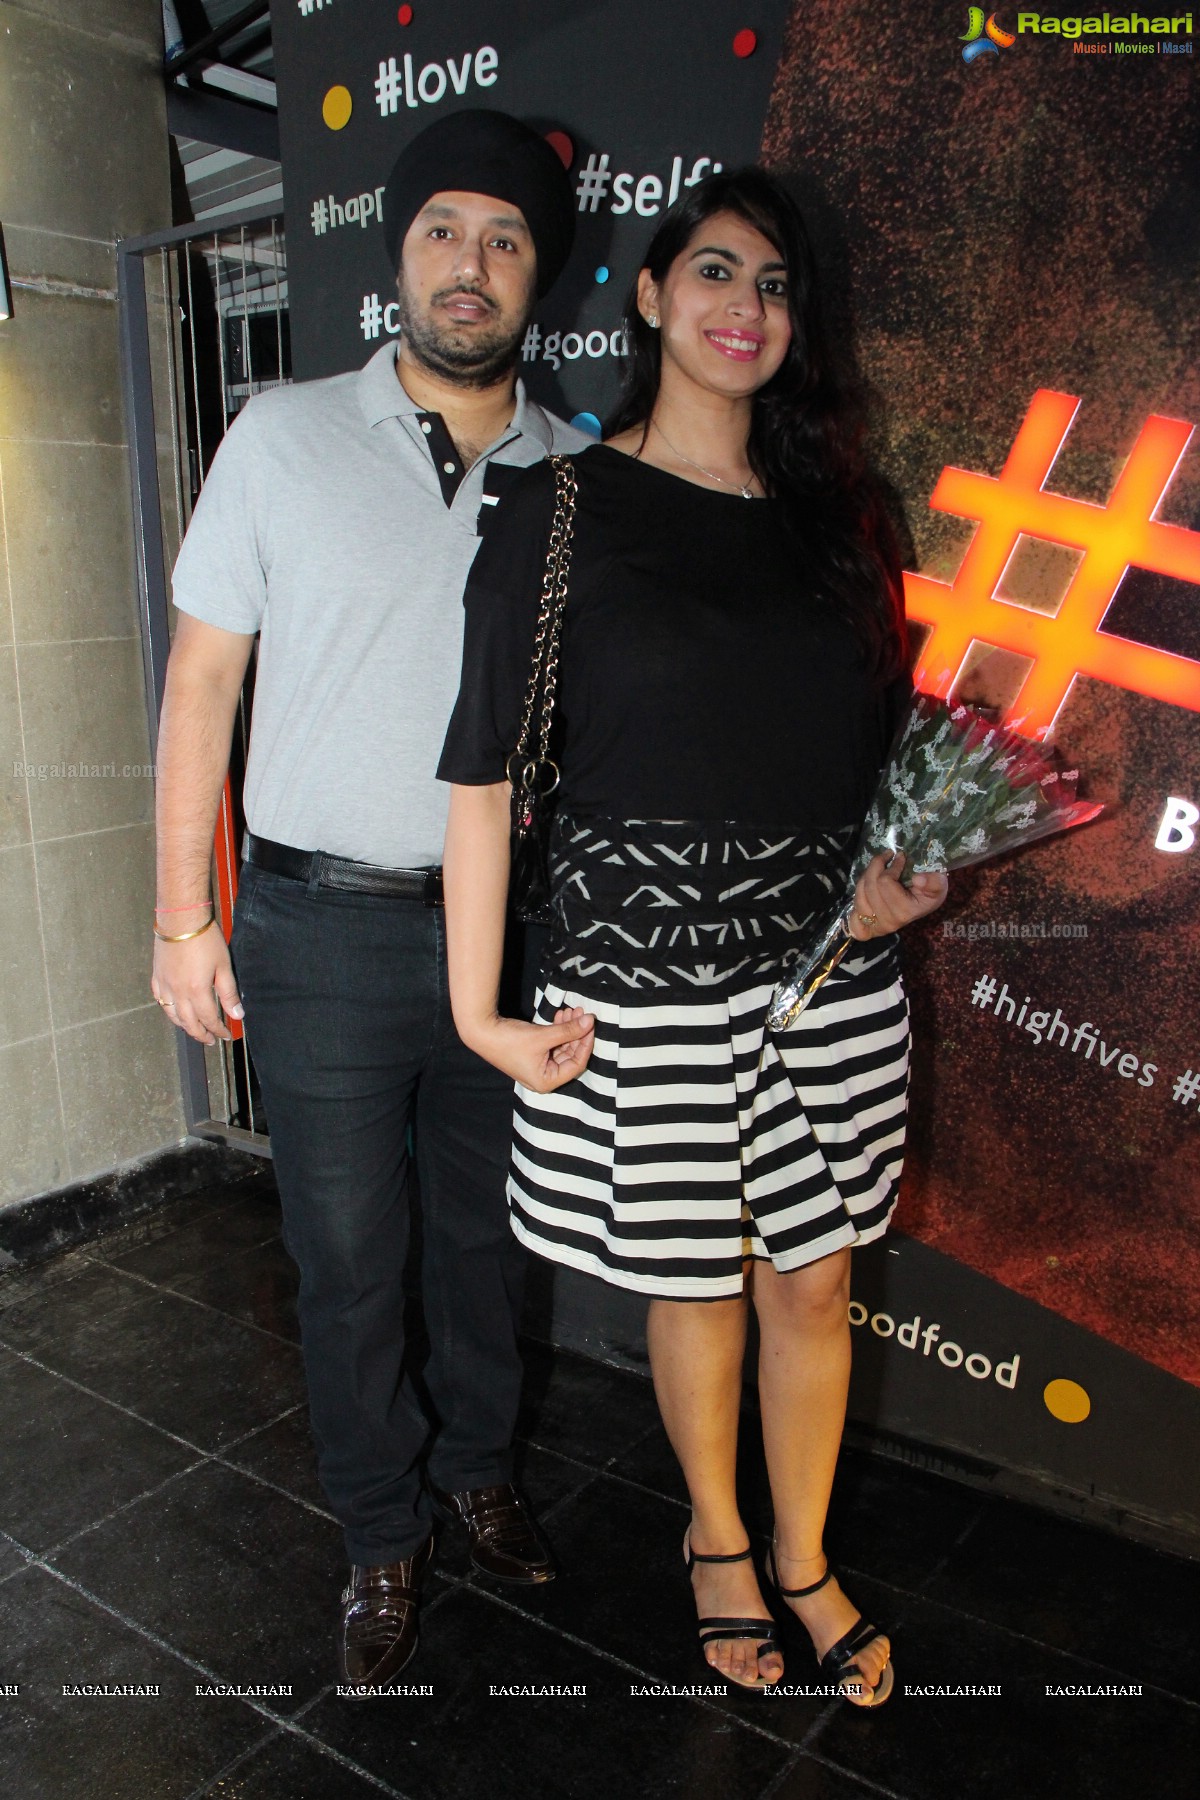 Grand Launch of #Hashtag Bar/Bistro in Hyderabad